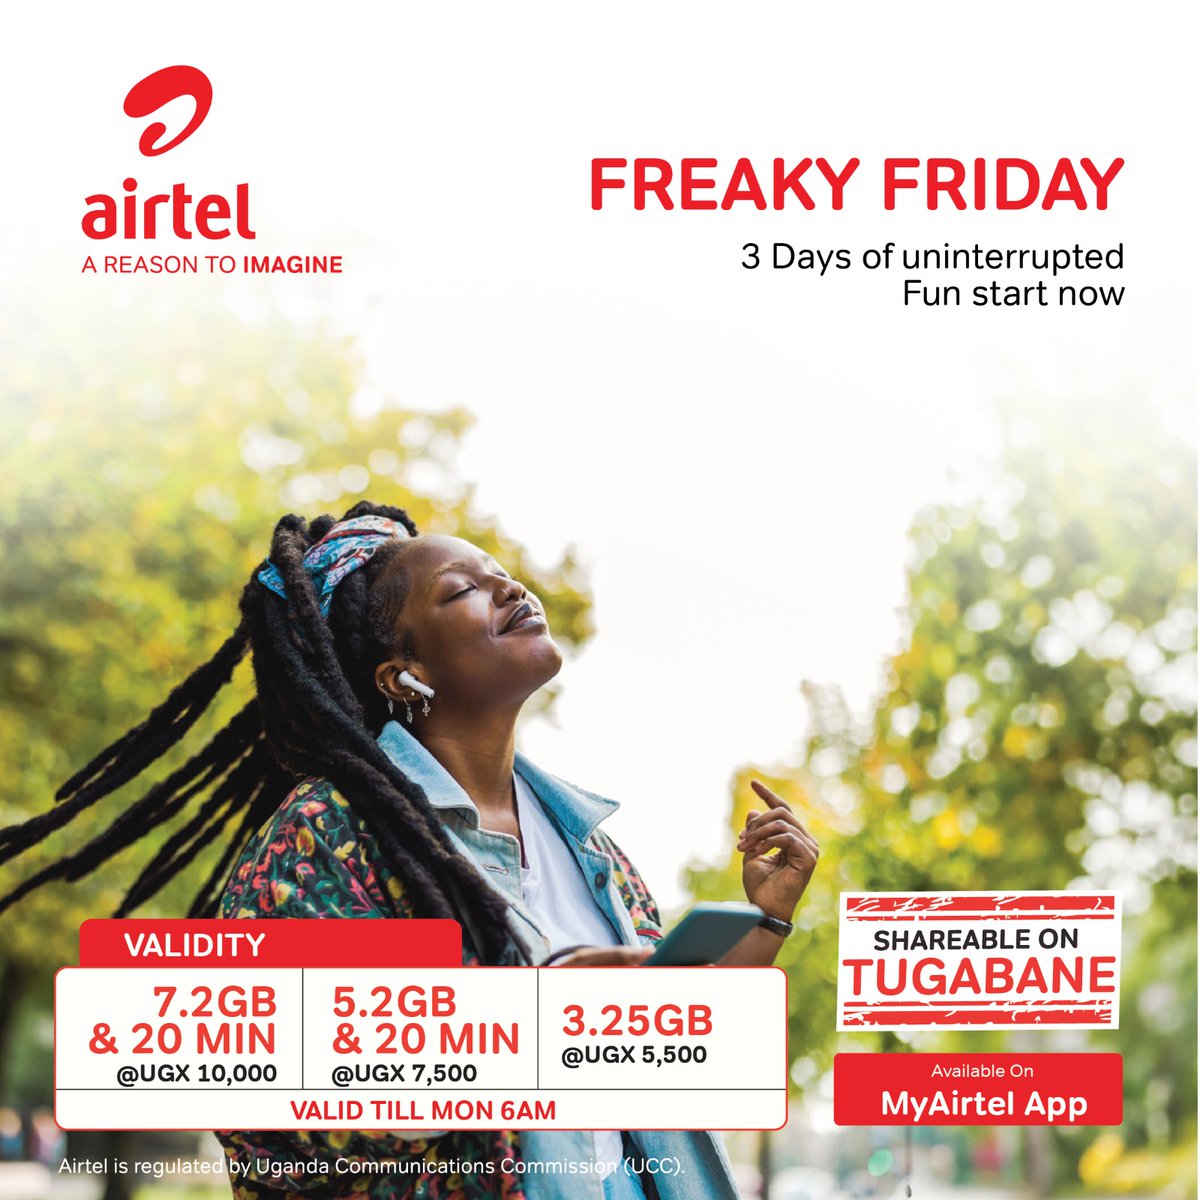 Seize the weekend with a bundle that's tailored to handle all your internet needs, purchase a #FreakyFriday bundle valid till Monday.

Dial *100*0# or visit airtelafrica.onelink.me/cGyr/qgj4qeu2 on the #MyAirtelApp